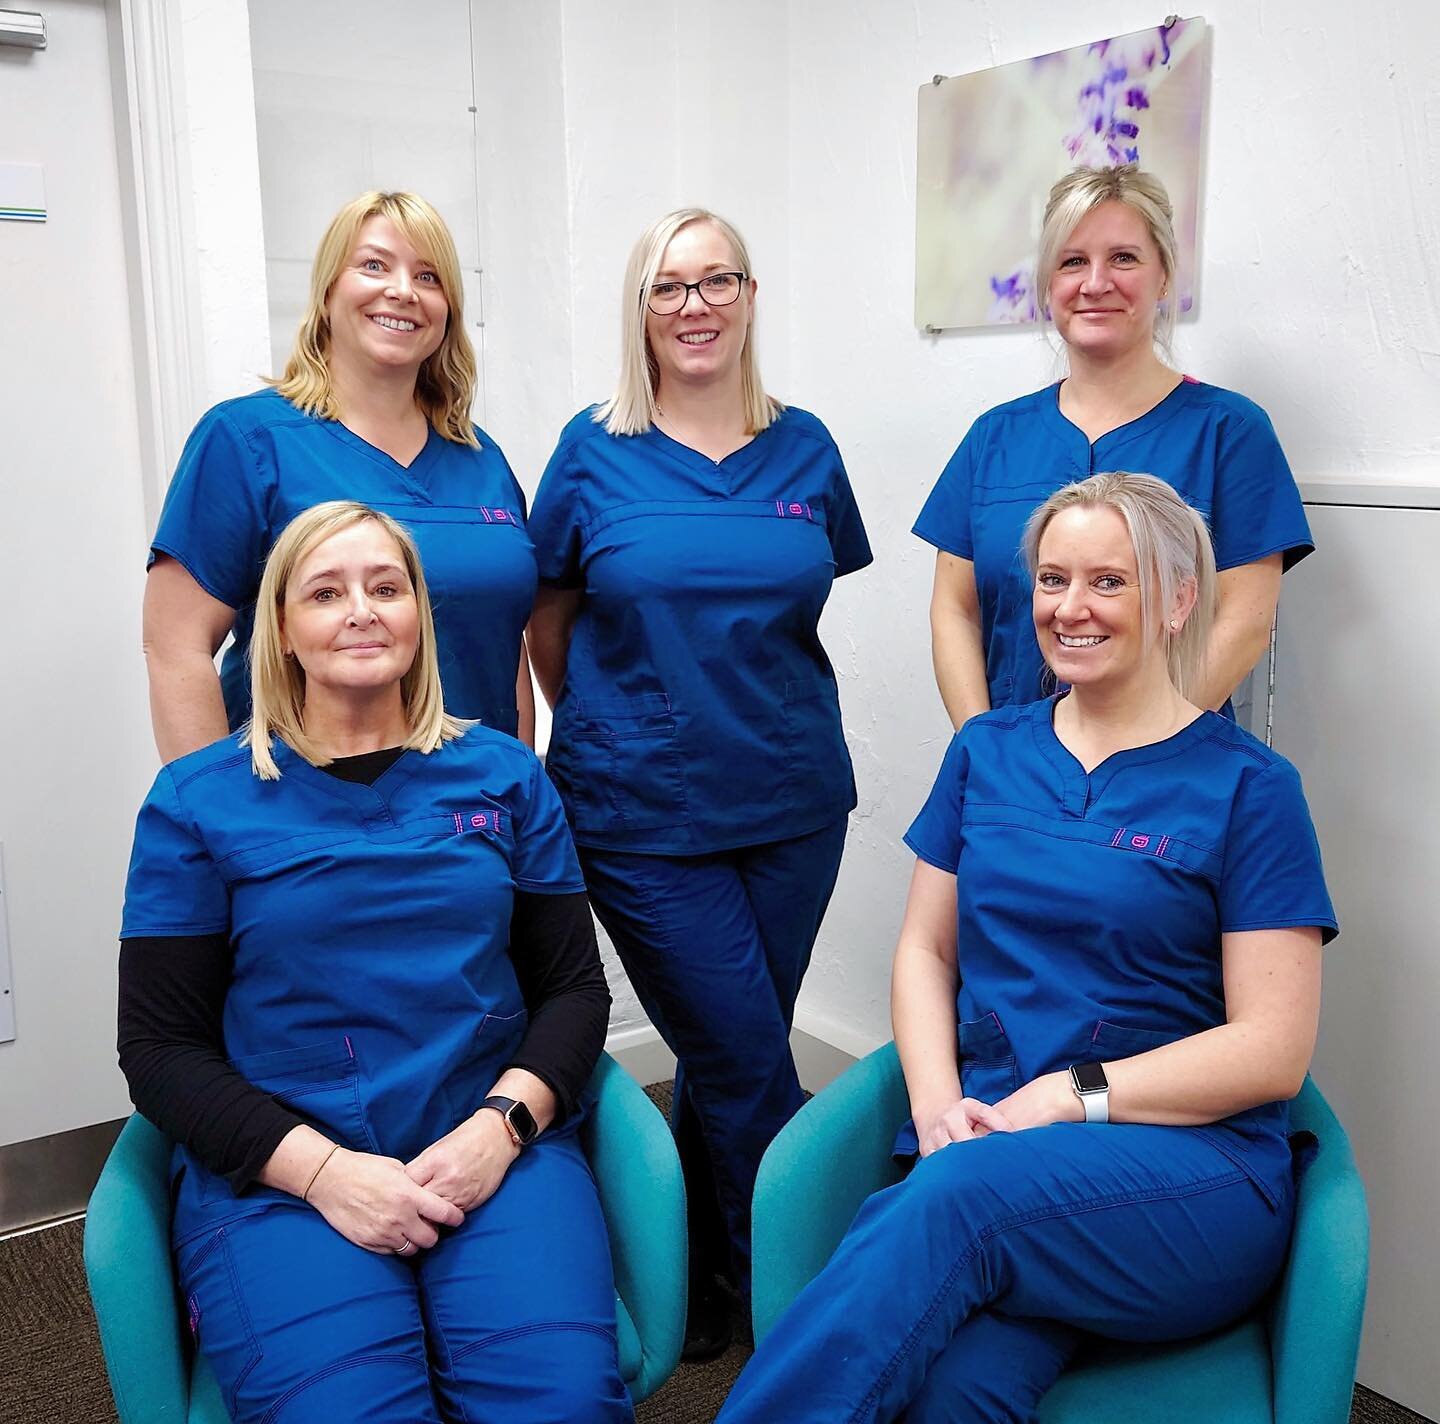 Team Thursday. Our ever professional &amp; helpful team ready to support you and our dentists. 
Gill, Claire, Emma, Leanne &amp; Sam don&rsquo;t just look good 😎

#dentalteamwork #dentalteam #dentalnurse #dentalnurses  #dcp #denplan @denplan #happys